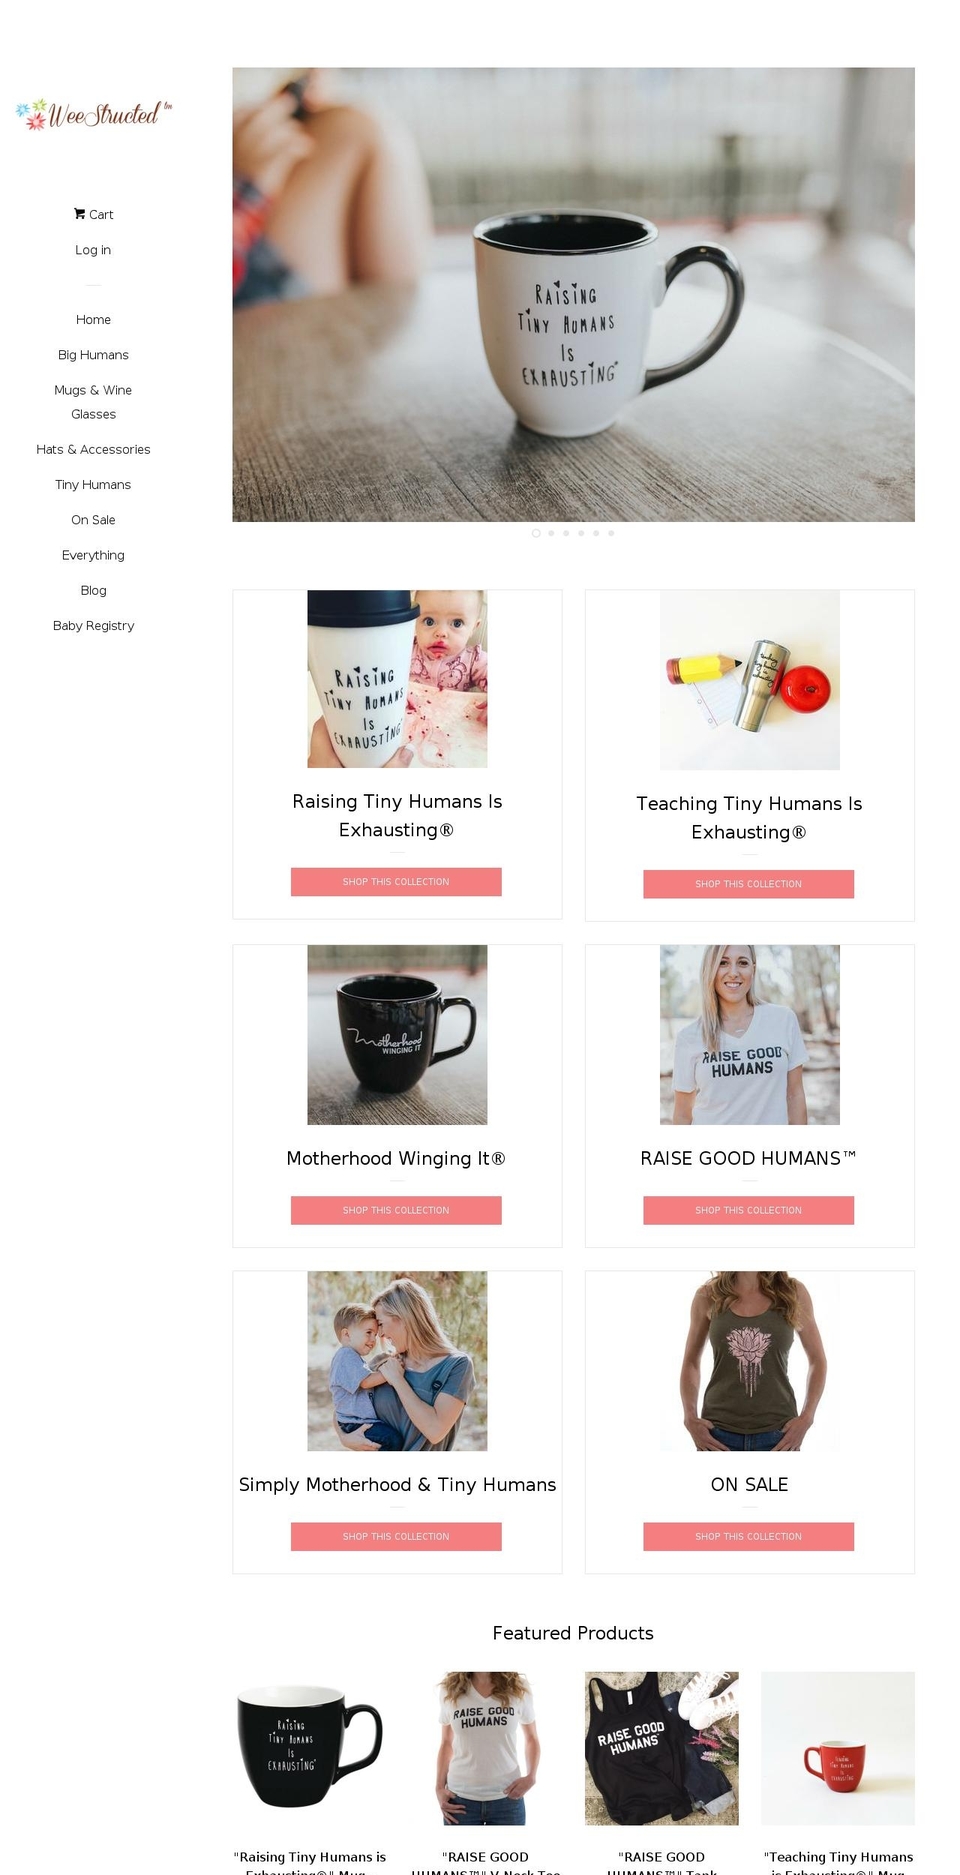 Alchemy Shopify theme site example weestructed.com